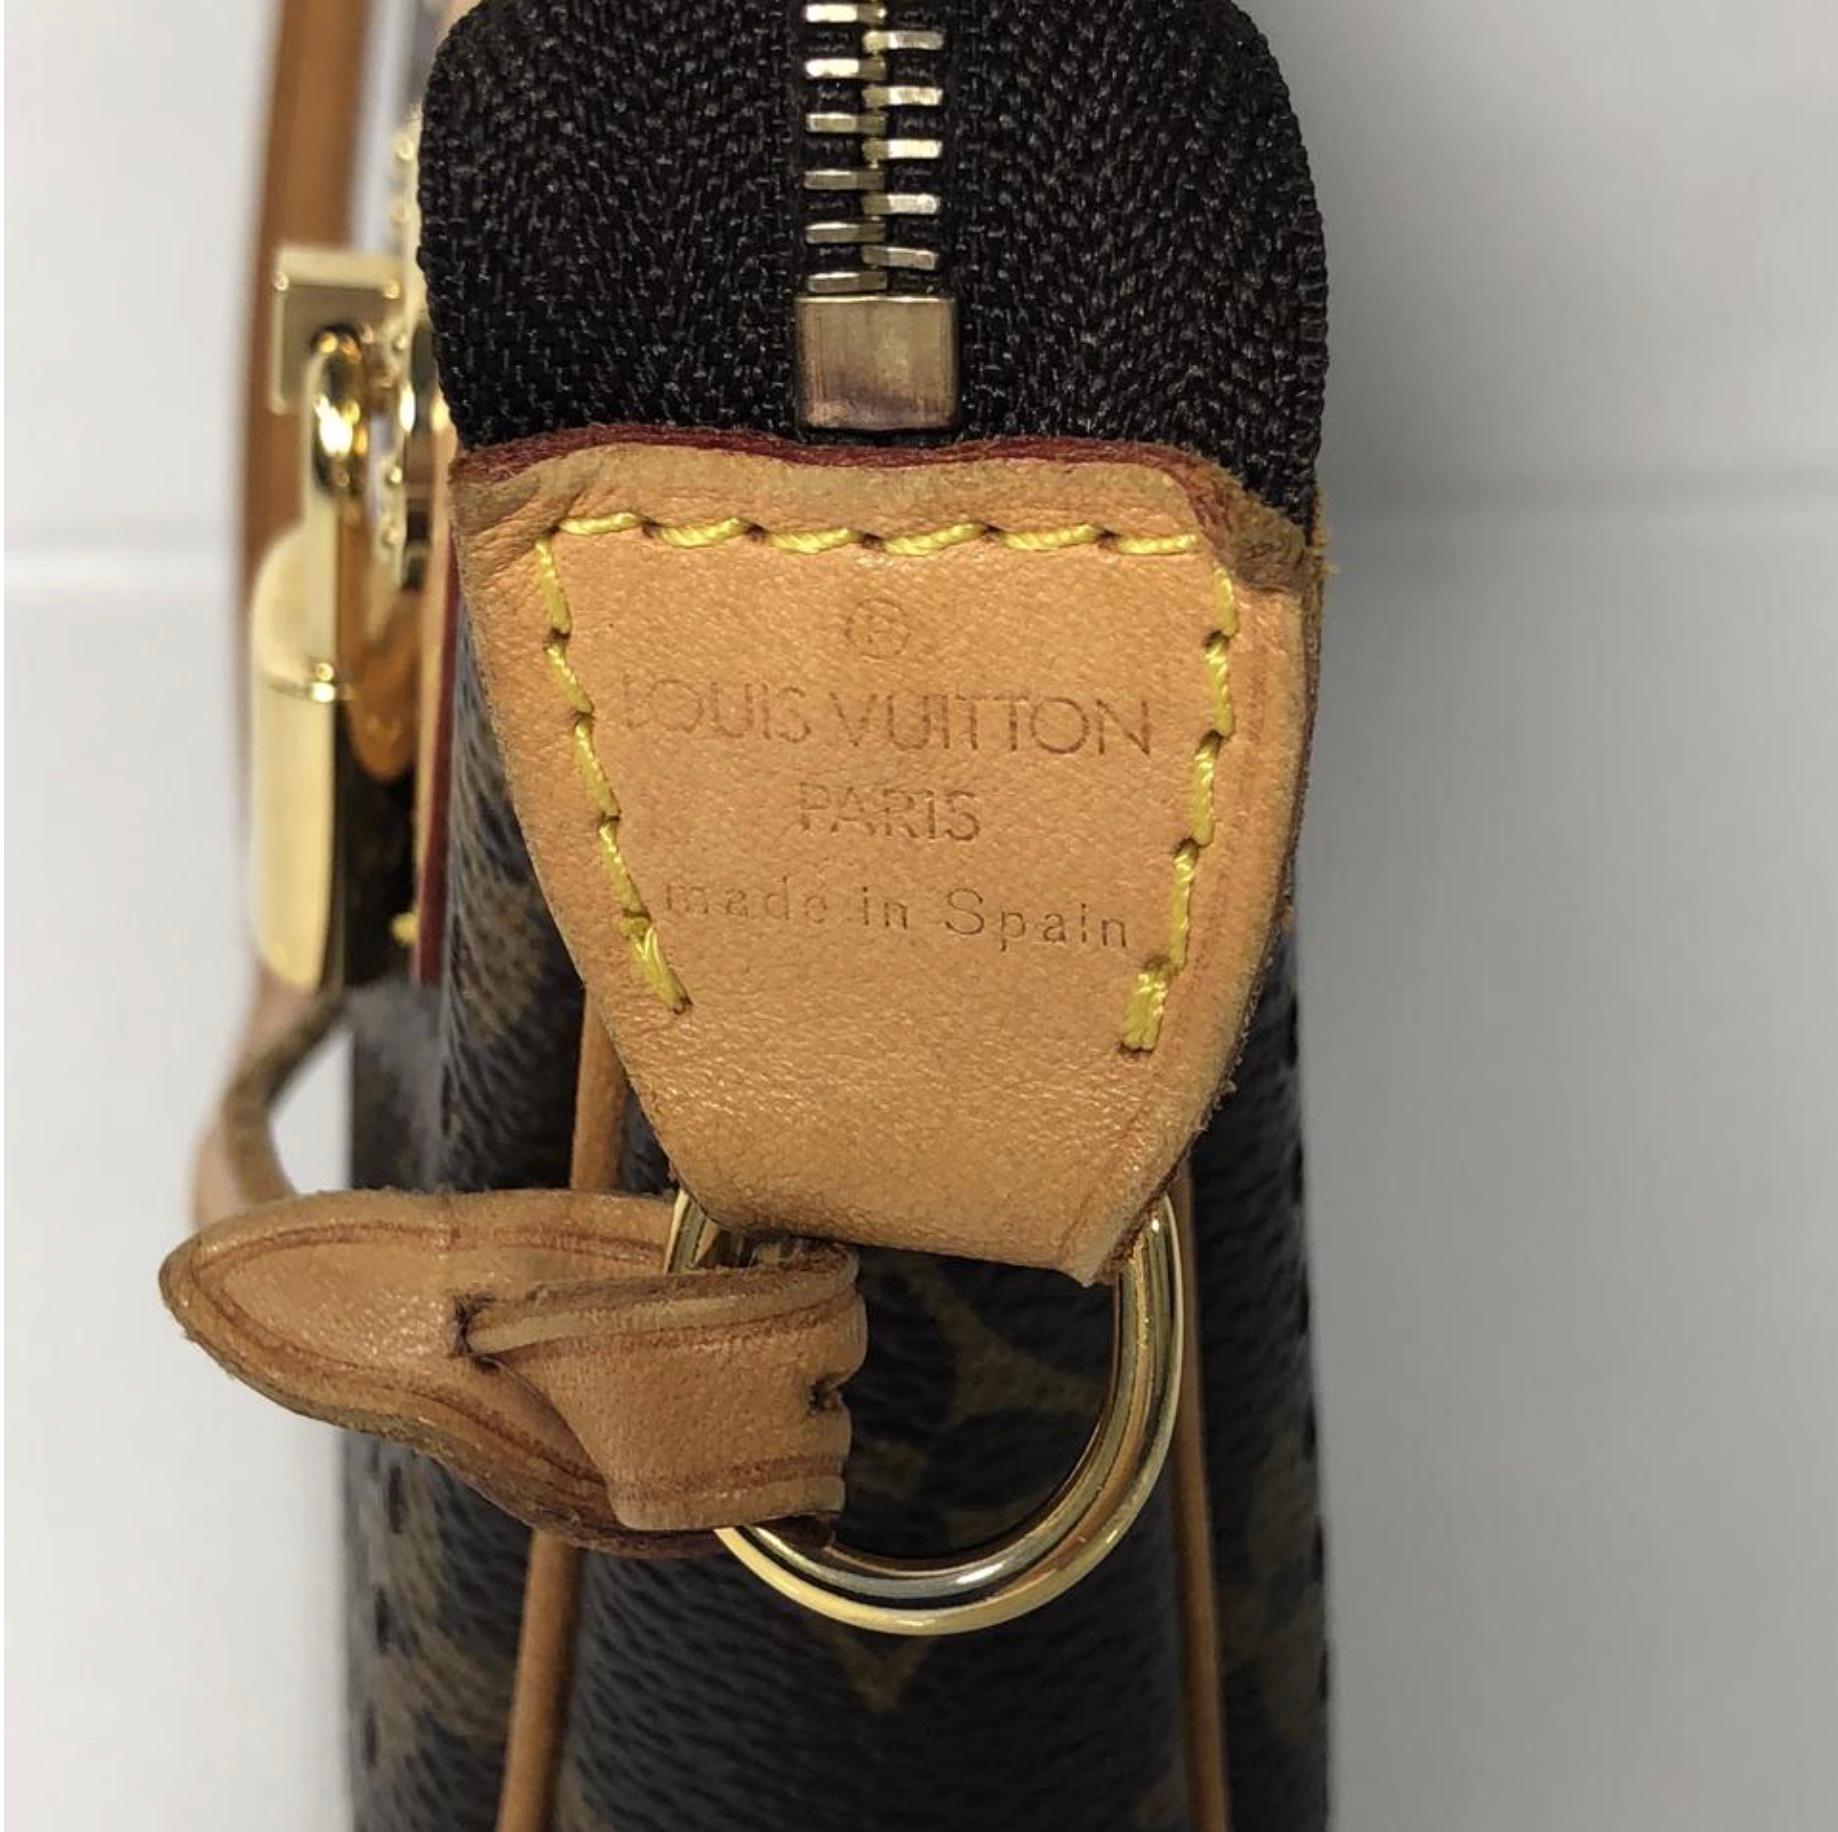 Louis Vuitton Monogram Perforated Pochette Accessories Wristlet In Excellent Condition For Sale In Saint Charles, IL